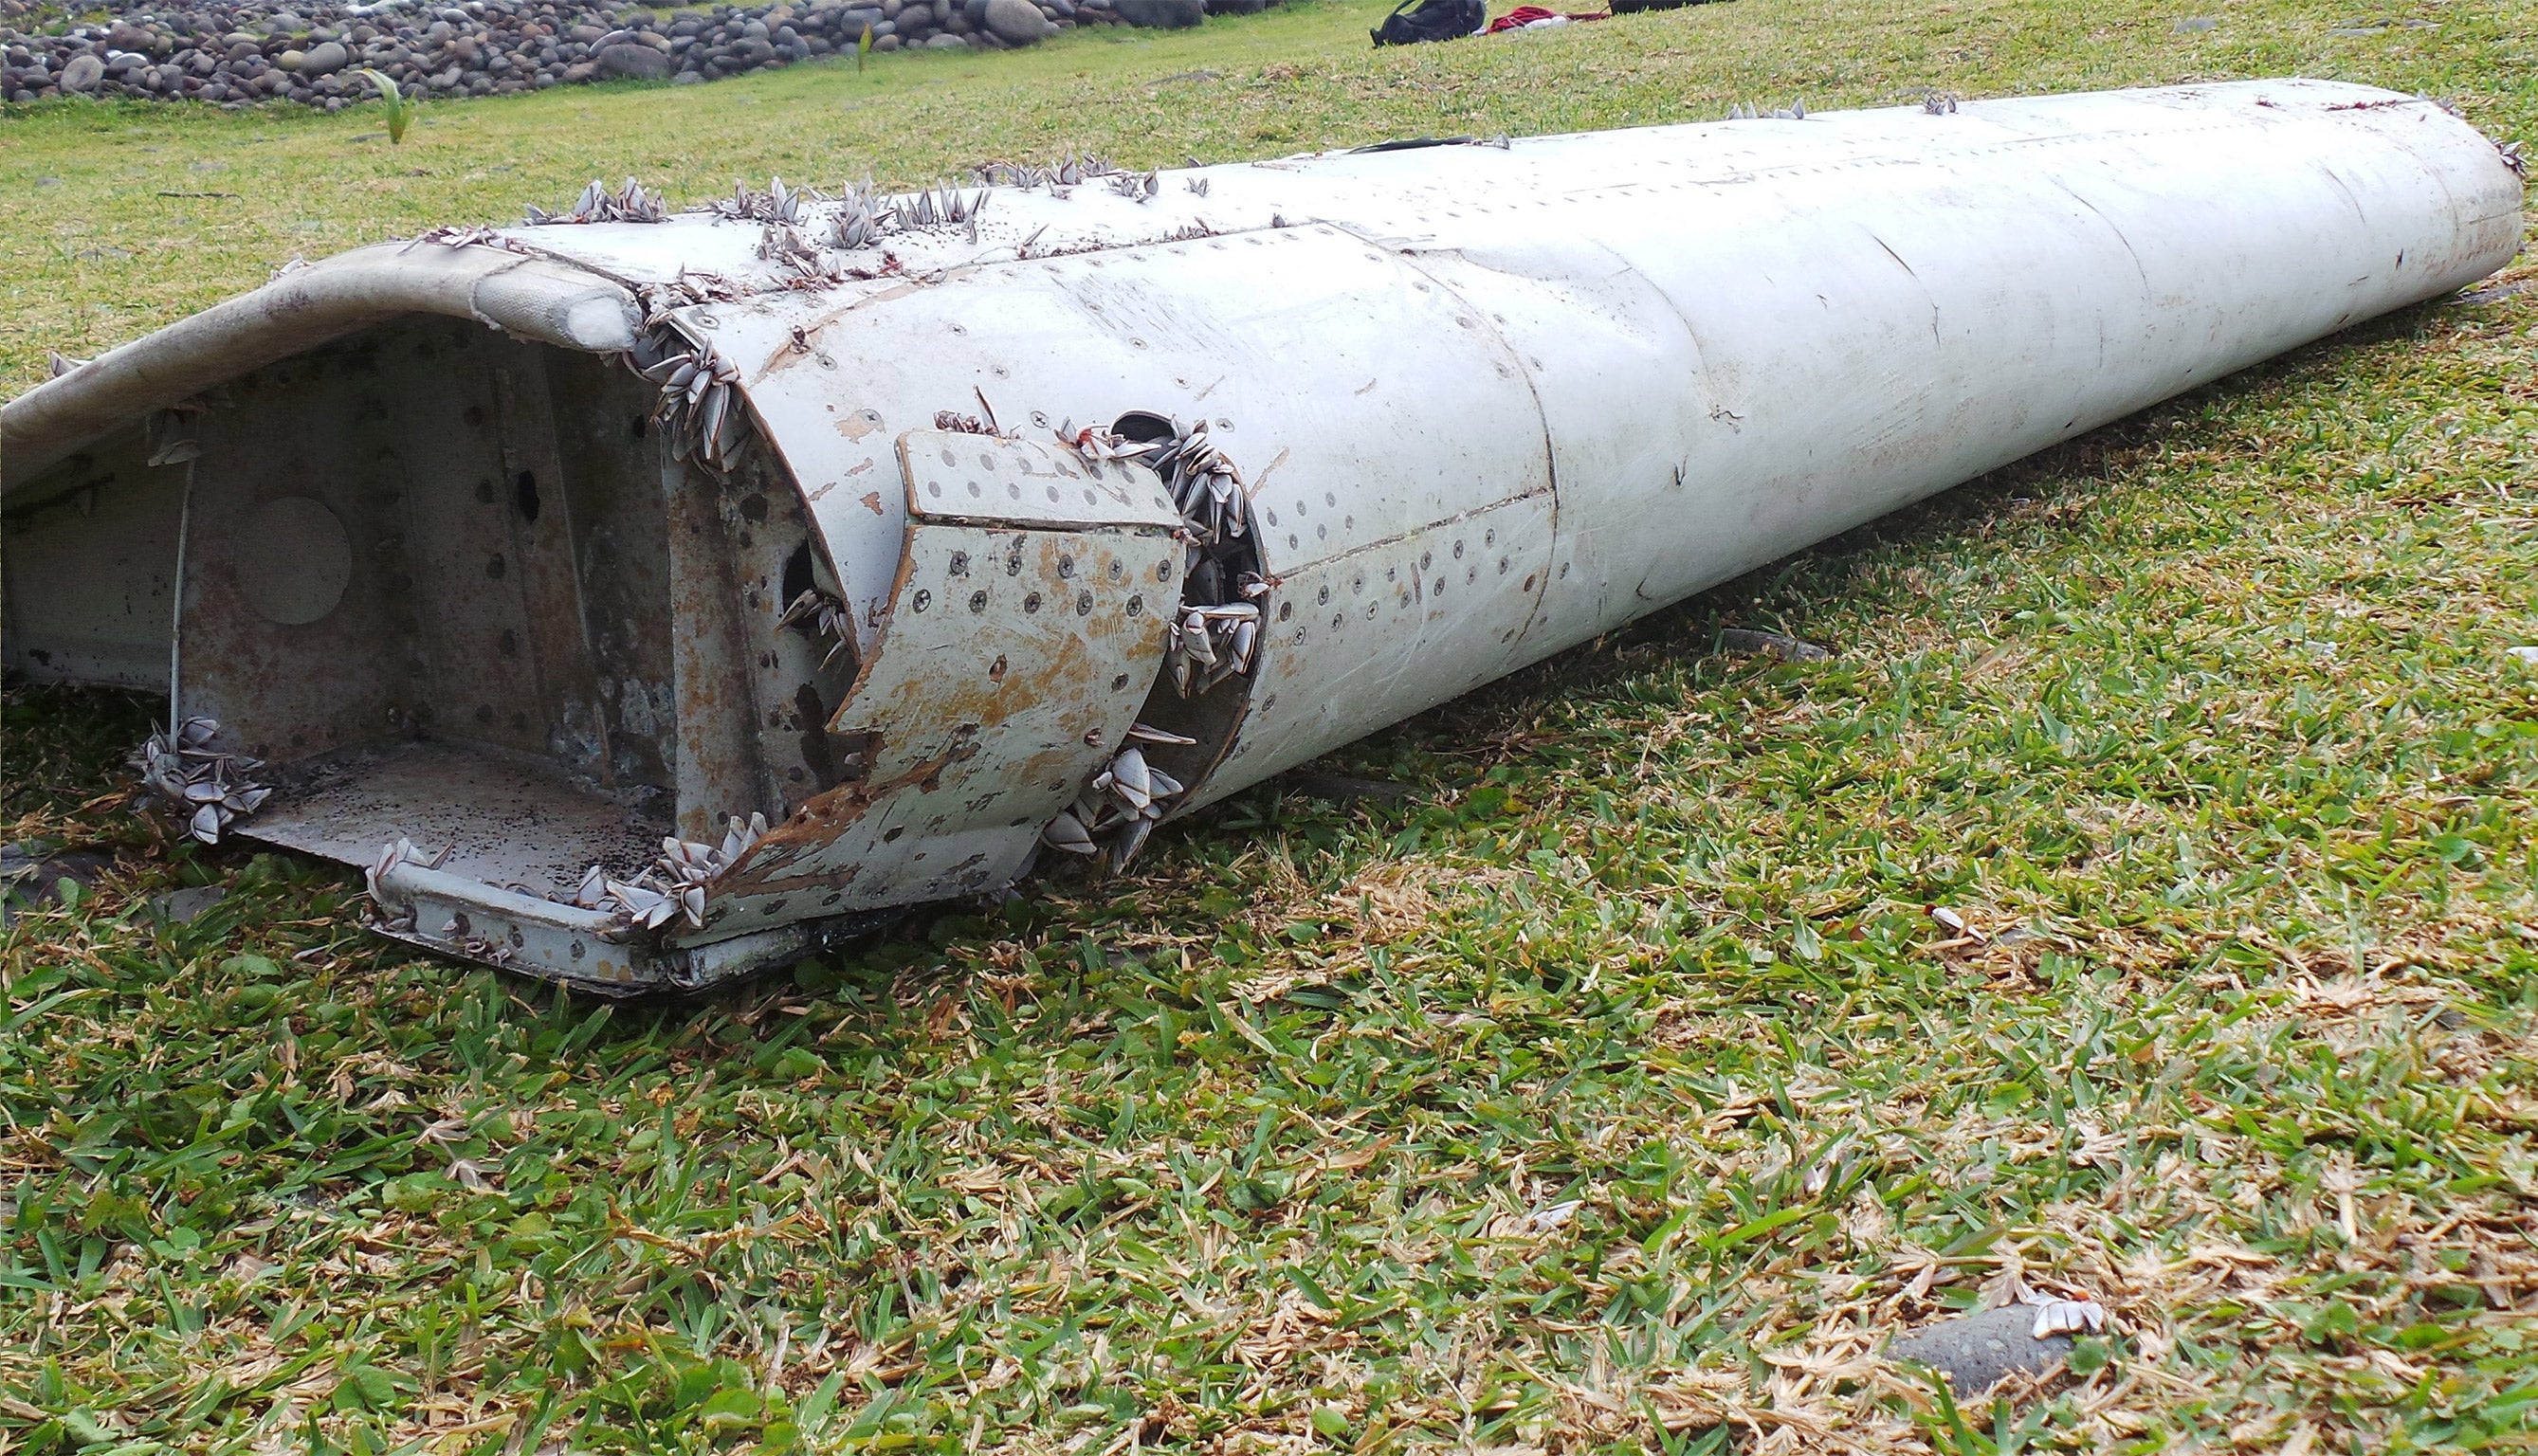 The aircraft wreckage was found on the French island of Reunion in the Indian Ocean